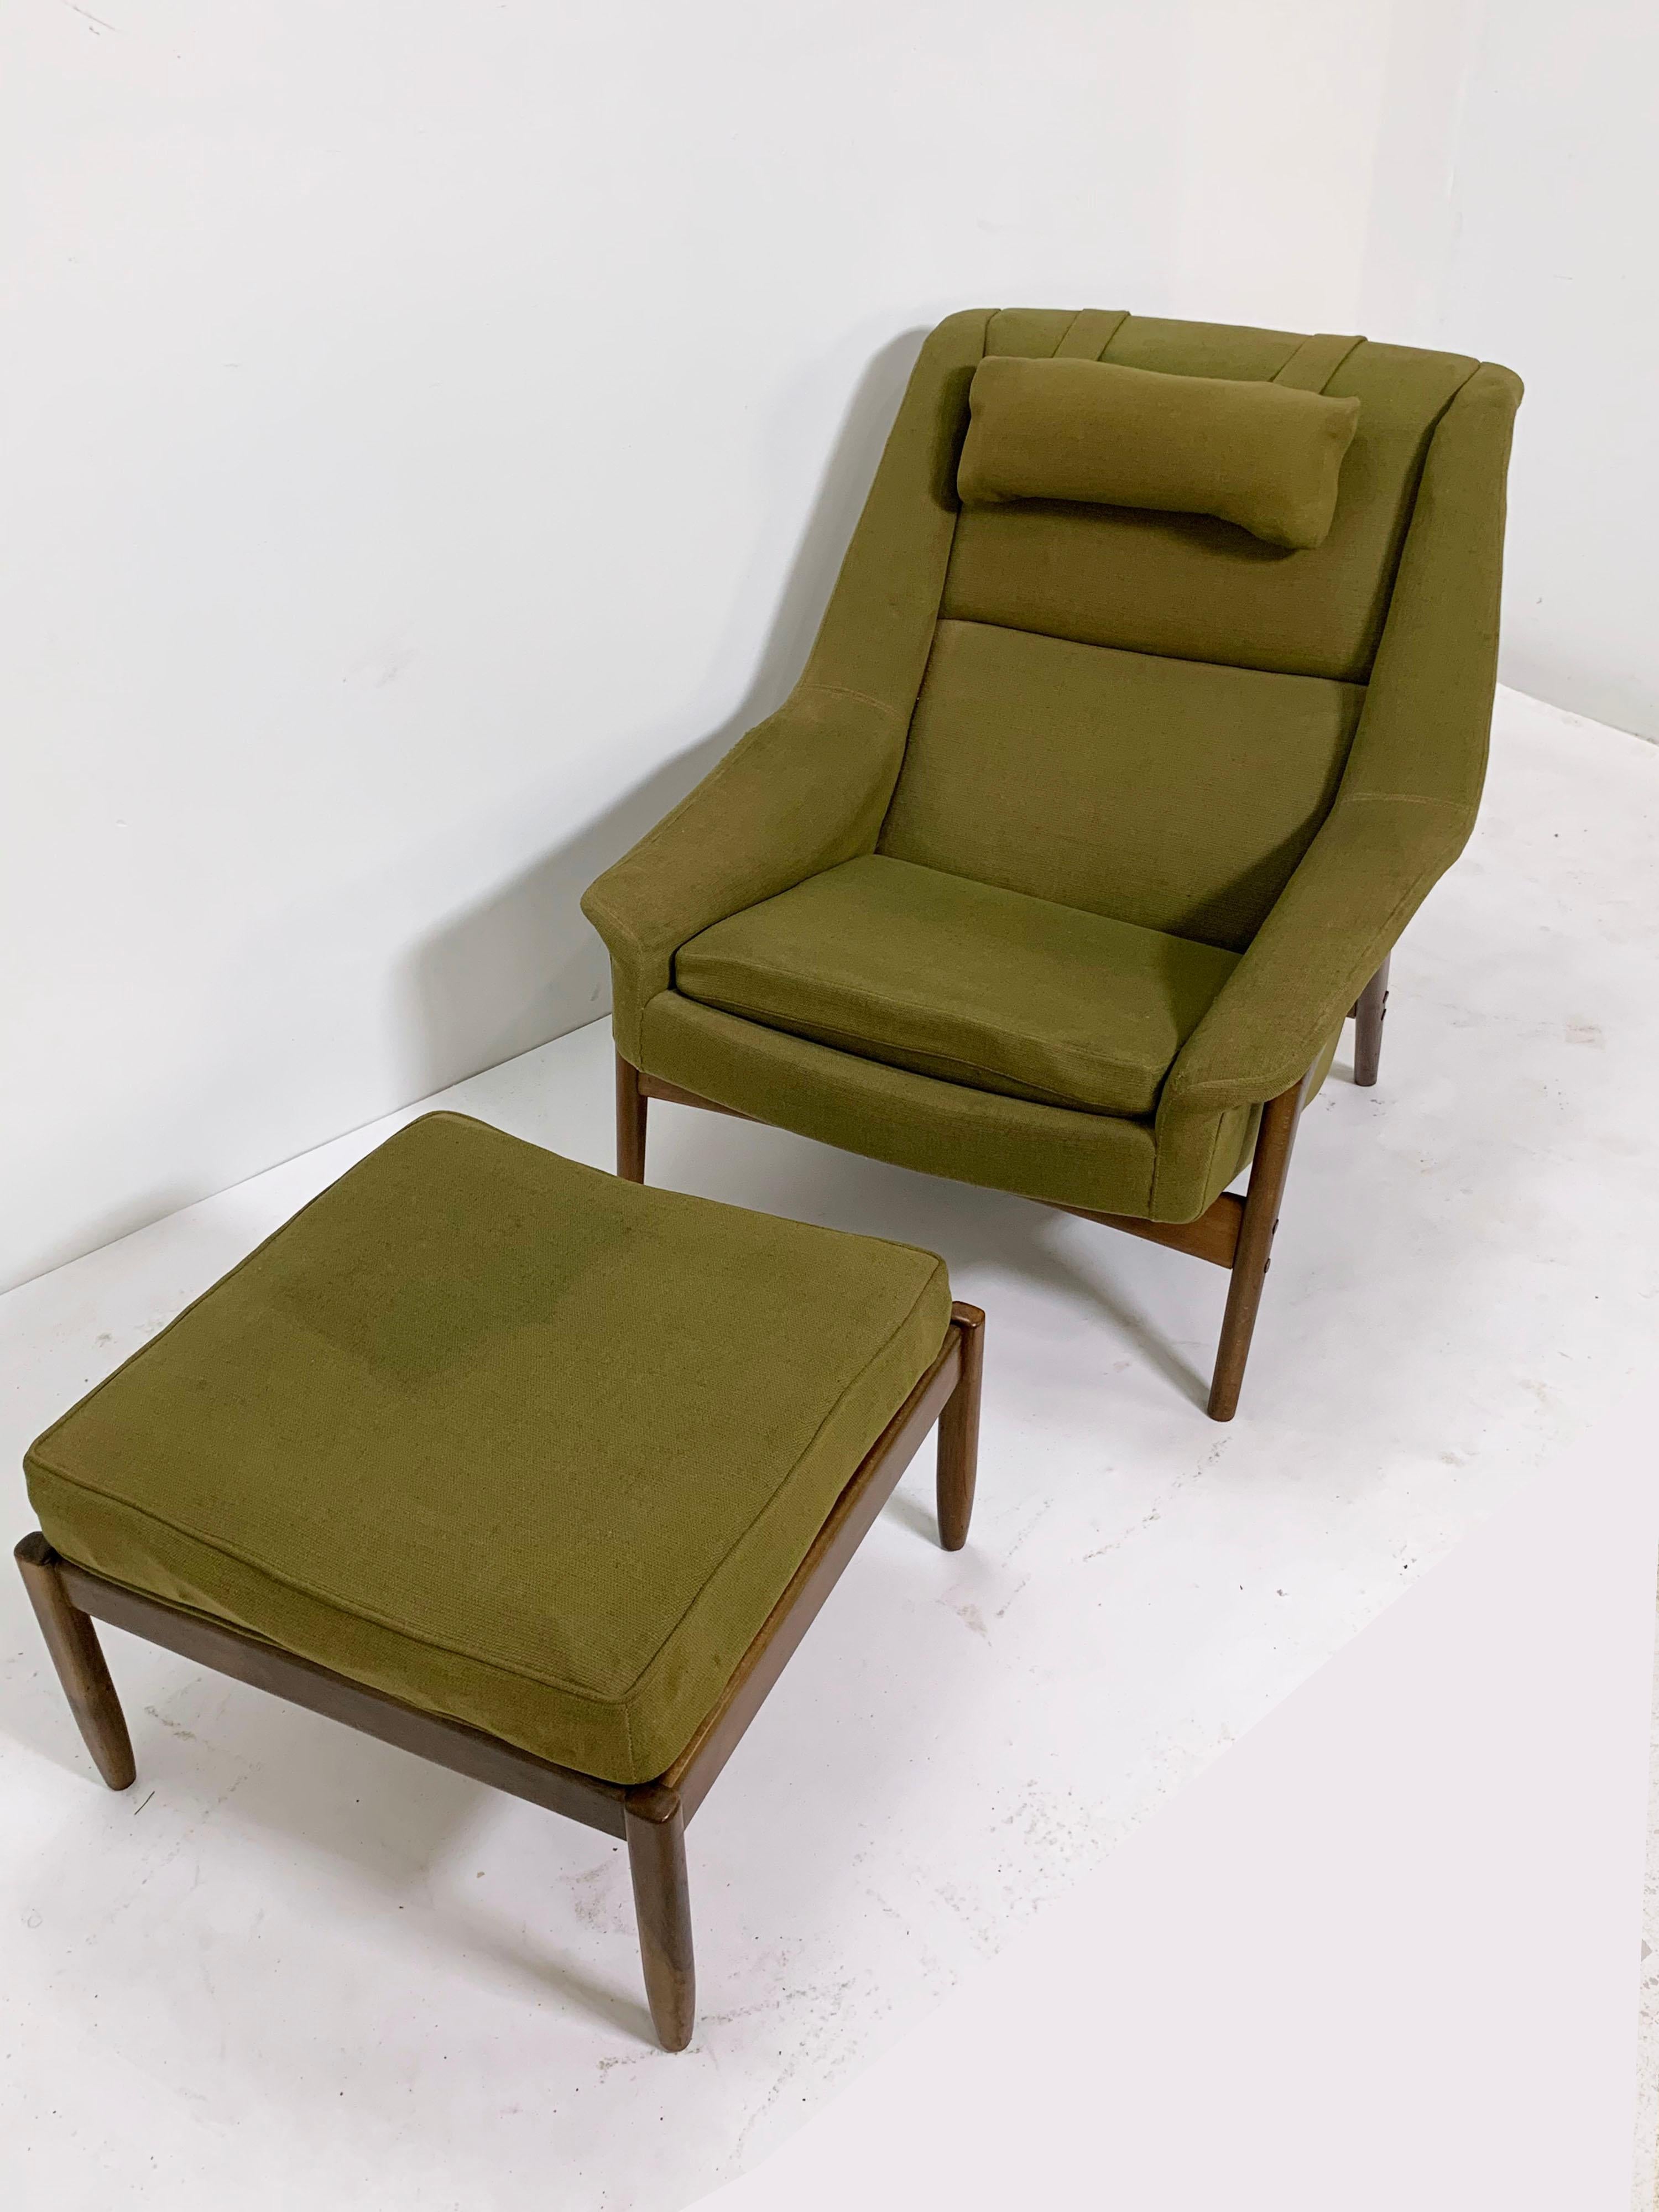 Swedish Folke Ohlsson for DUX Lounge Chair with Ottoman, circa 1960s